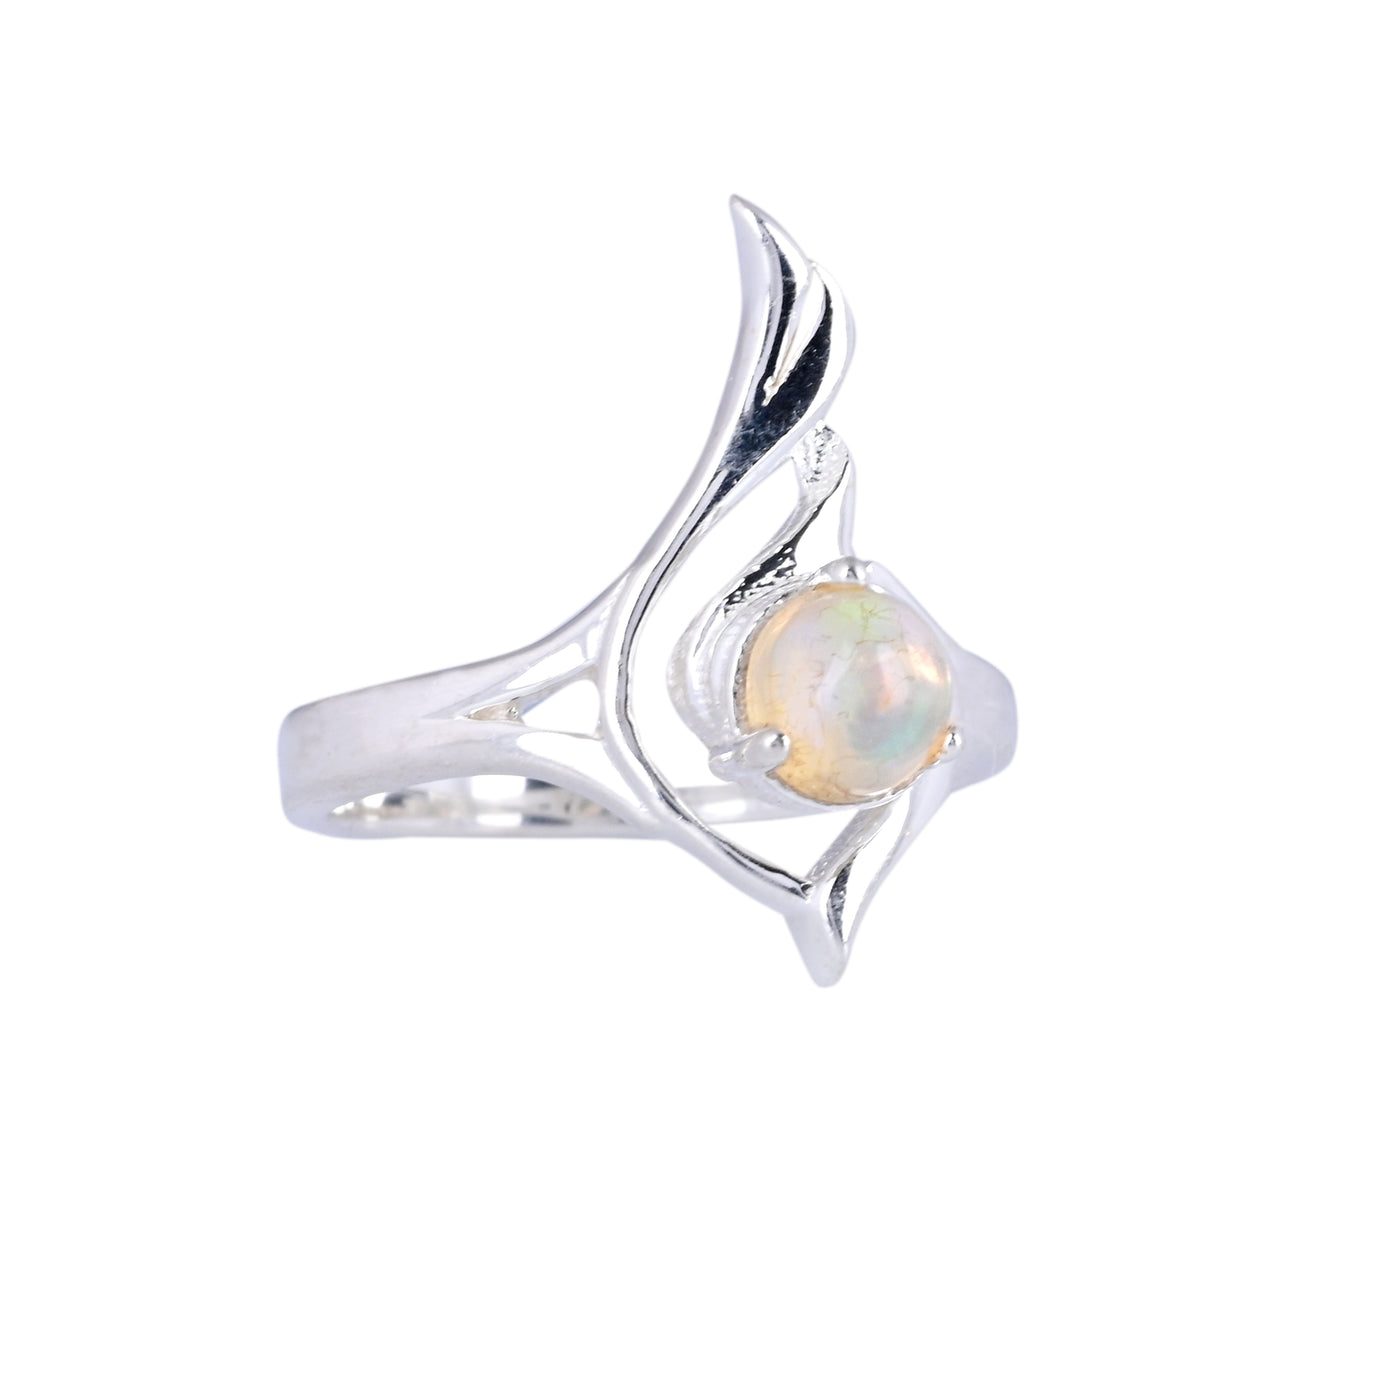 Vintage Facted White Opal Solitaire Bypass Ring